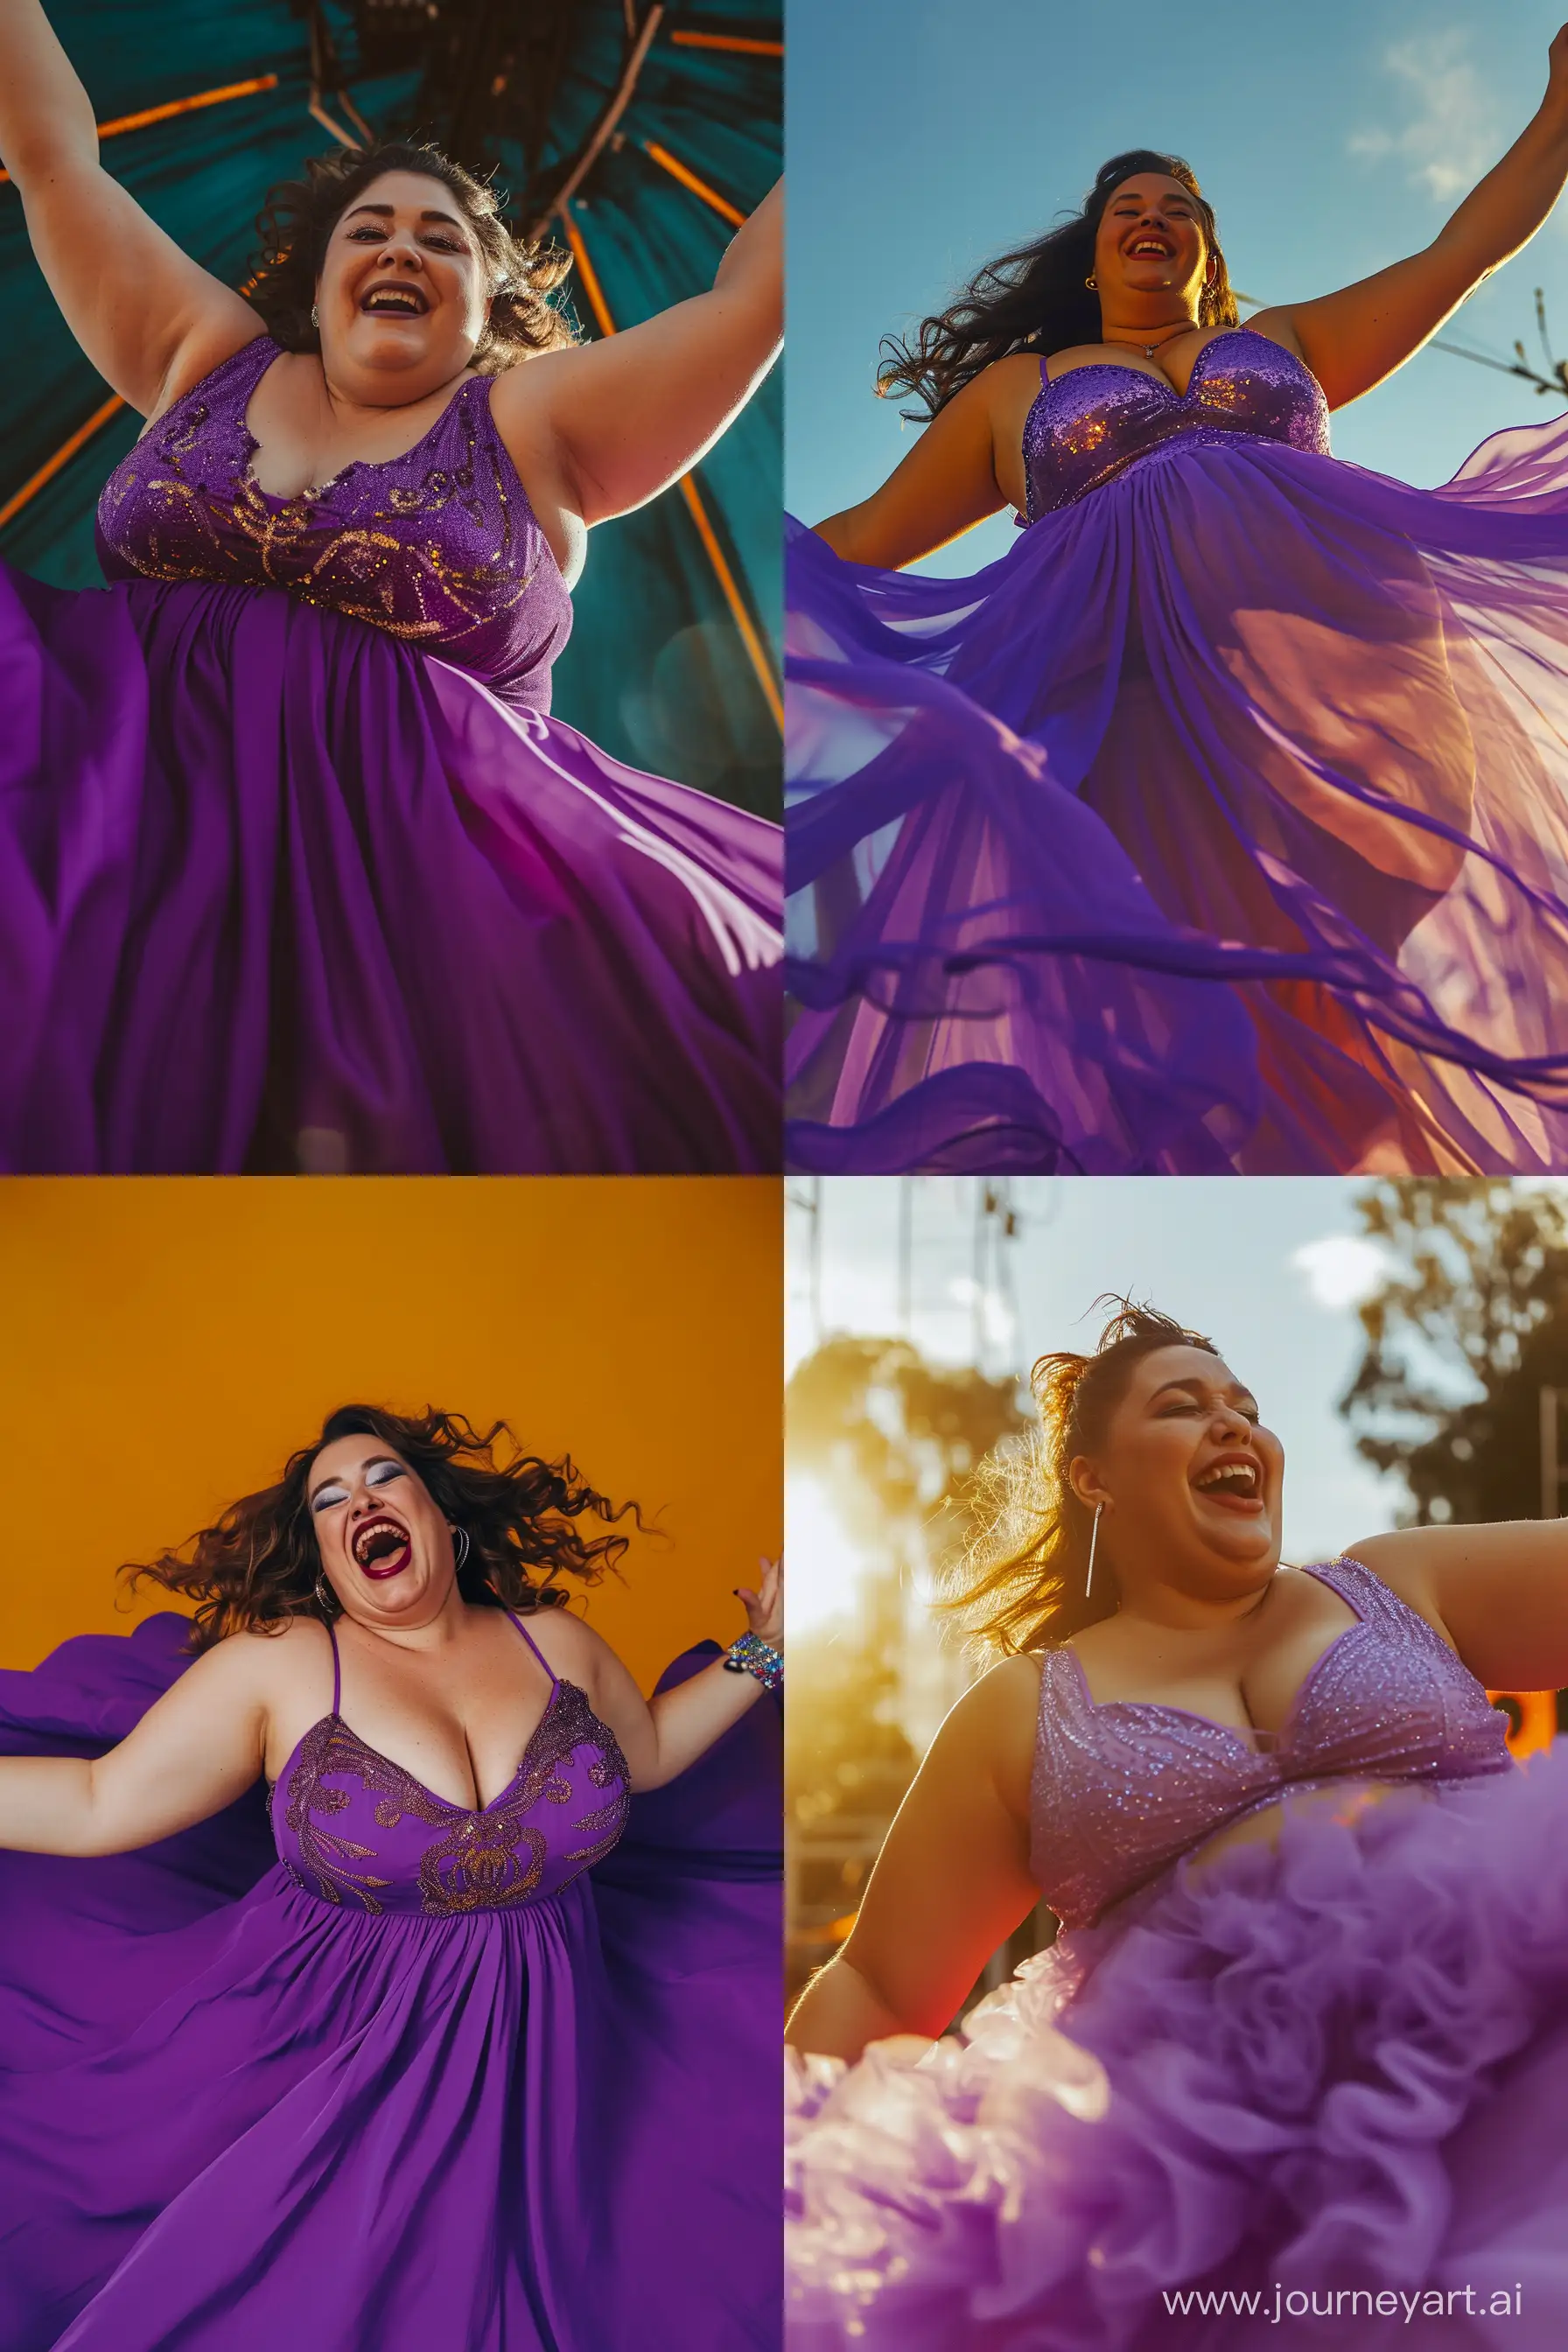 Energetic-Overweight-Woman-Embracing-Heavy-Metal-Vibes-in-Purple-Dress-Crdoba-Argentina